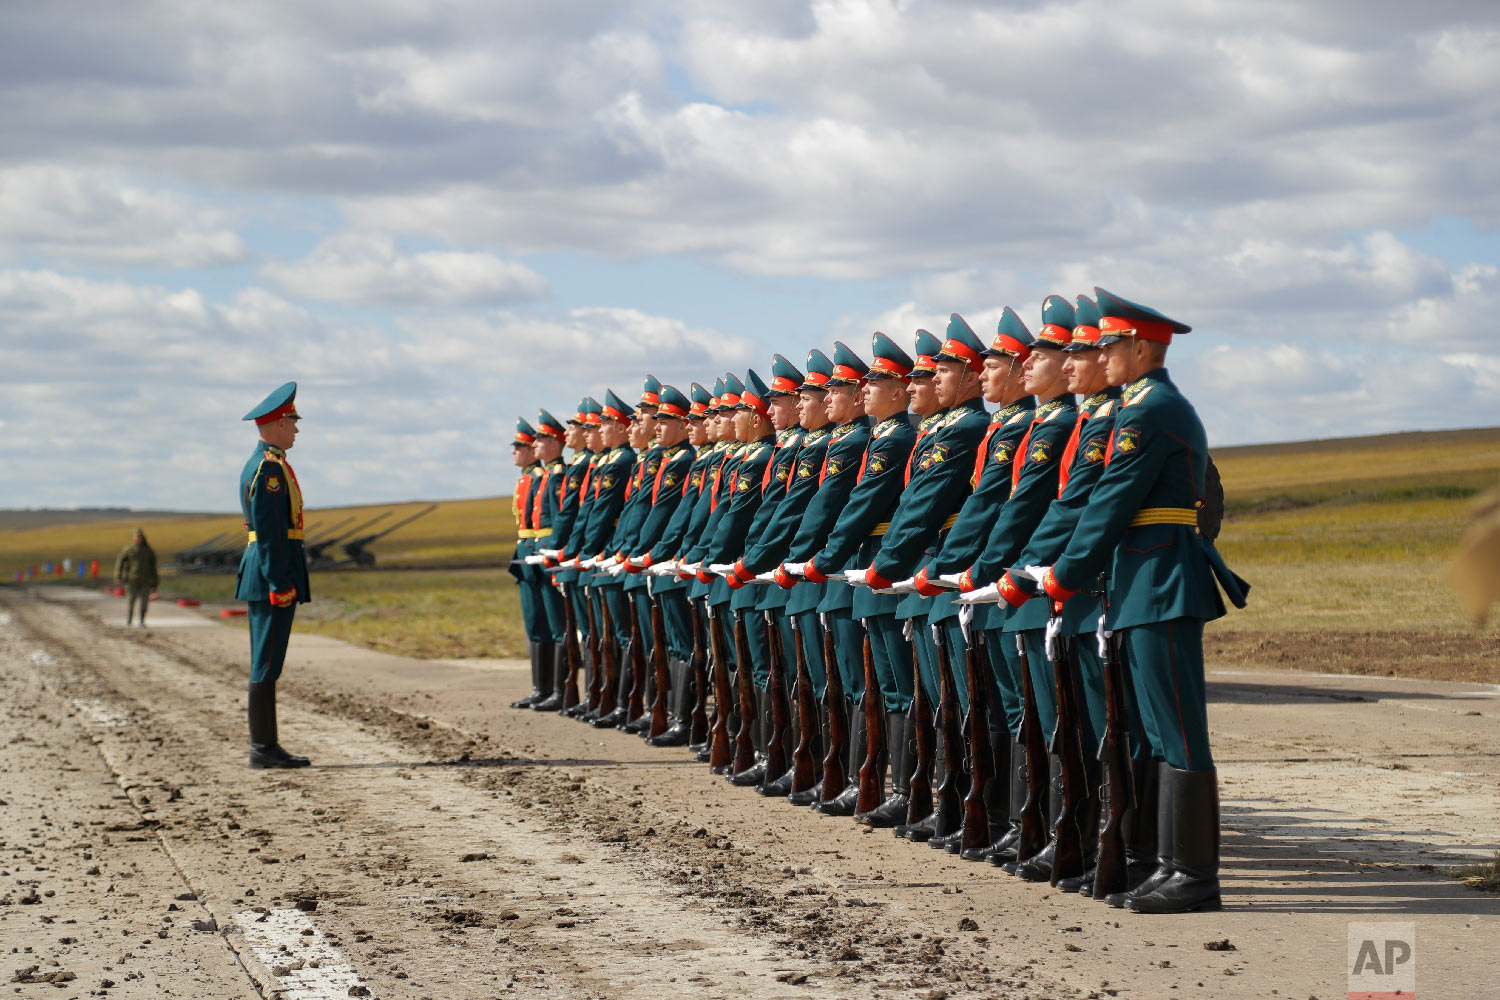  A Russian honor guard prepares to take a part in a parade prior to a military exercises on training ground "Tsugol", about 250 kilometers (156 miles ) south-east of the city of Chita during Vostok 2018 in Eastern Siberia, Russia on Sept. 13, 2018. (